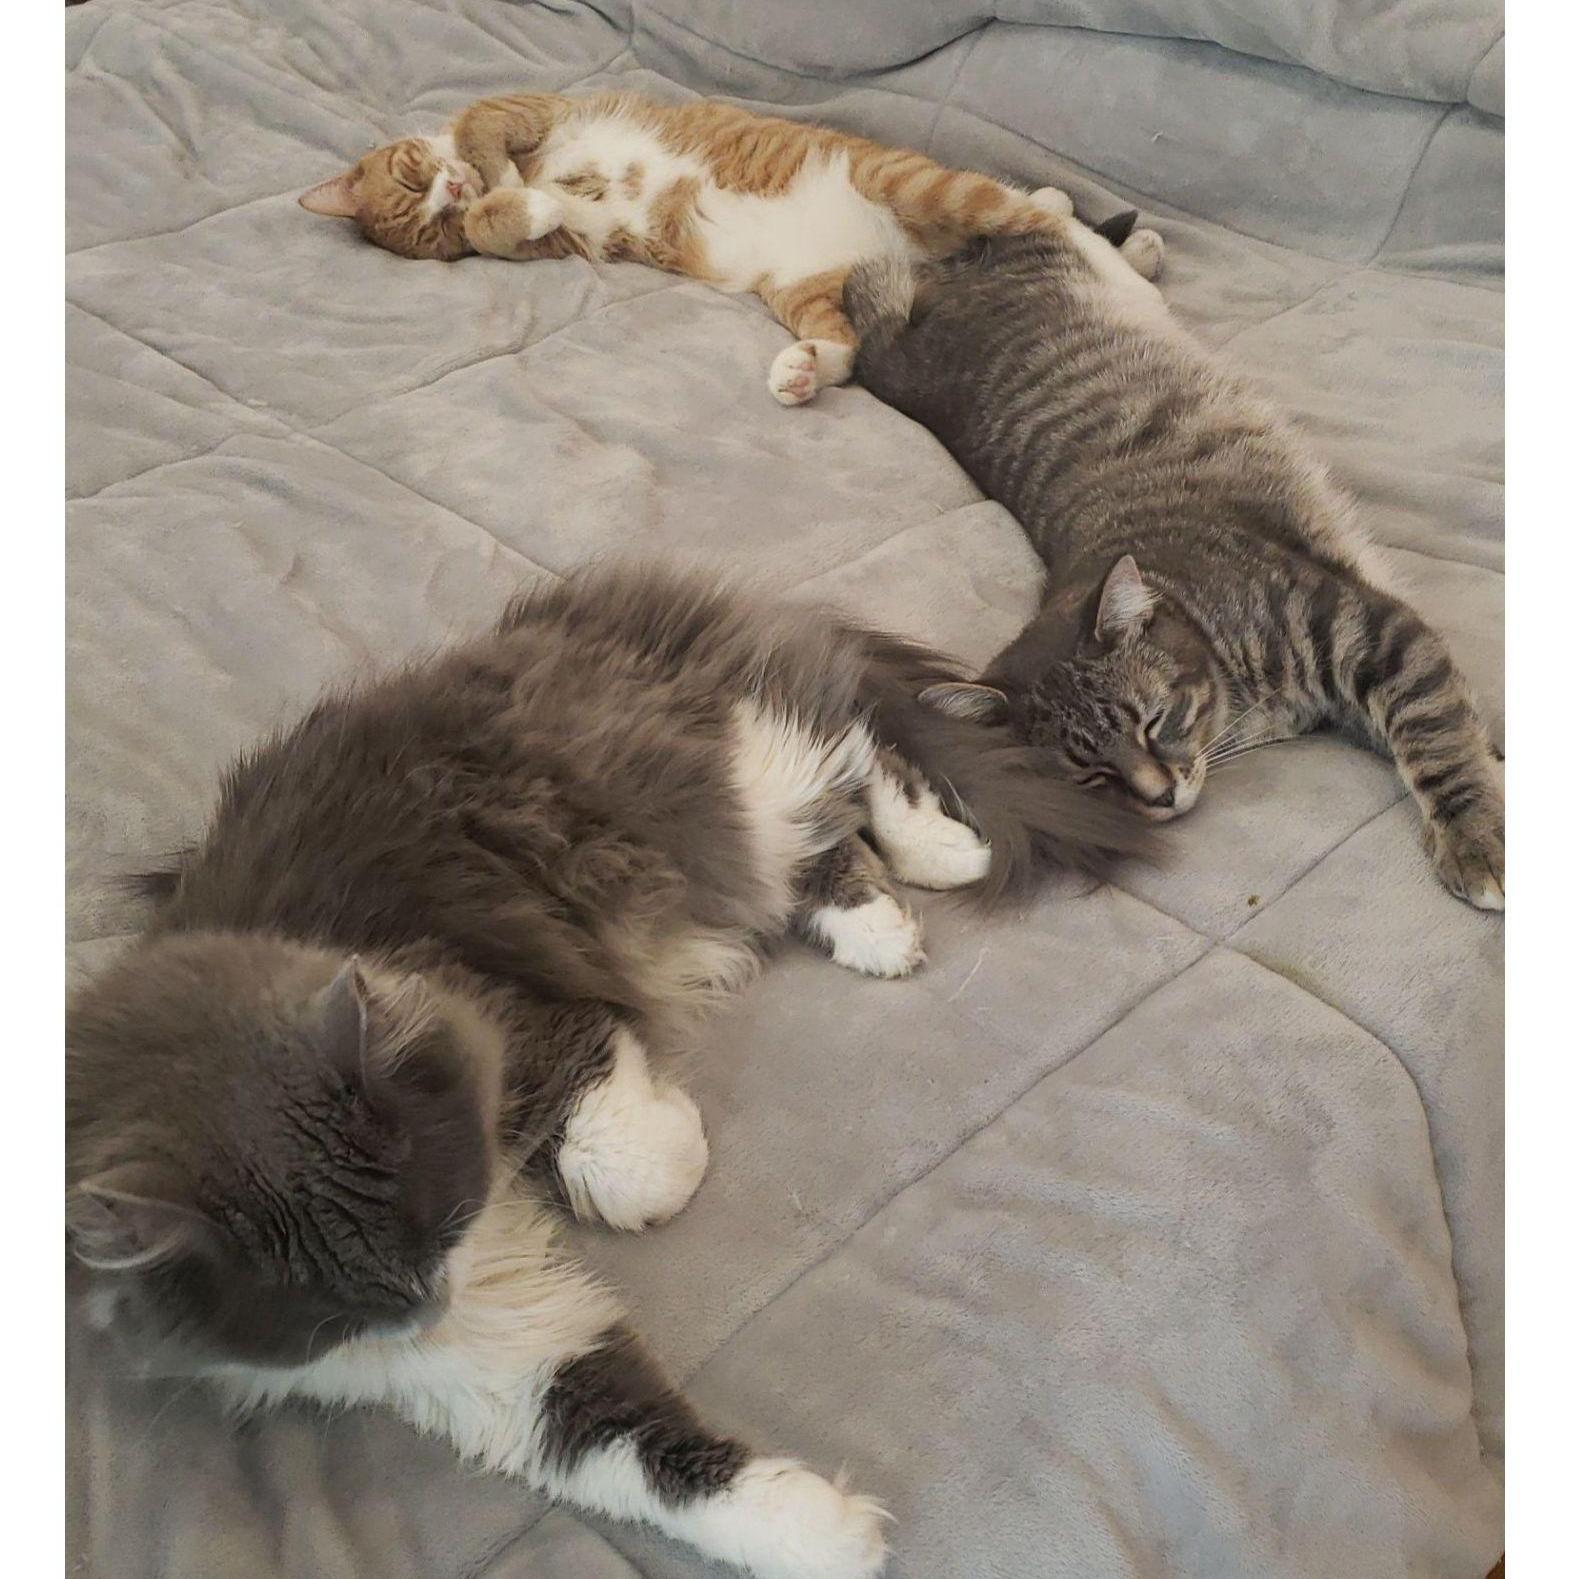 Unlike her other sister, Vera actually enjoys hanging out with the kittens. Seeing the three of them lounging on the bed like this is a daily occurrence.